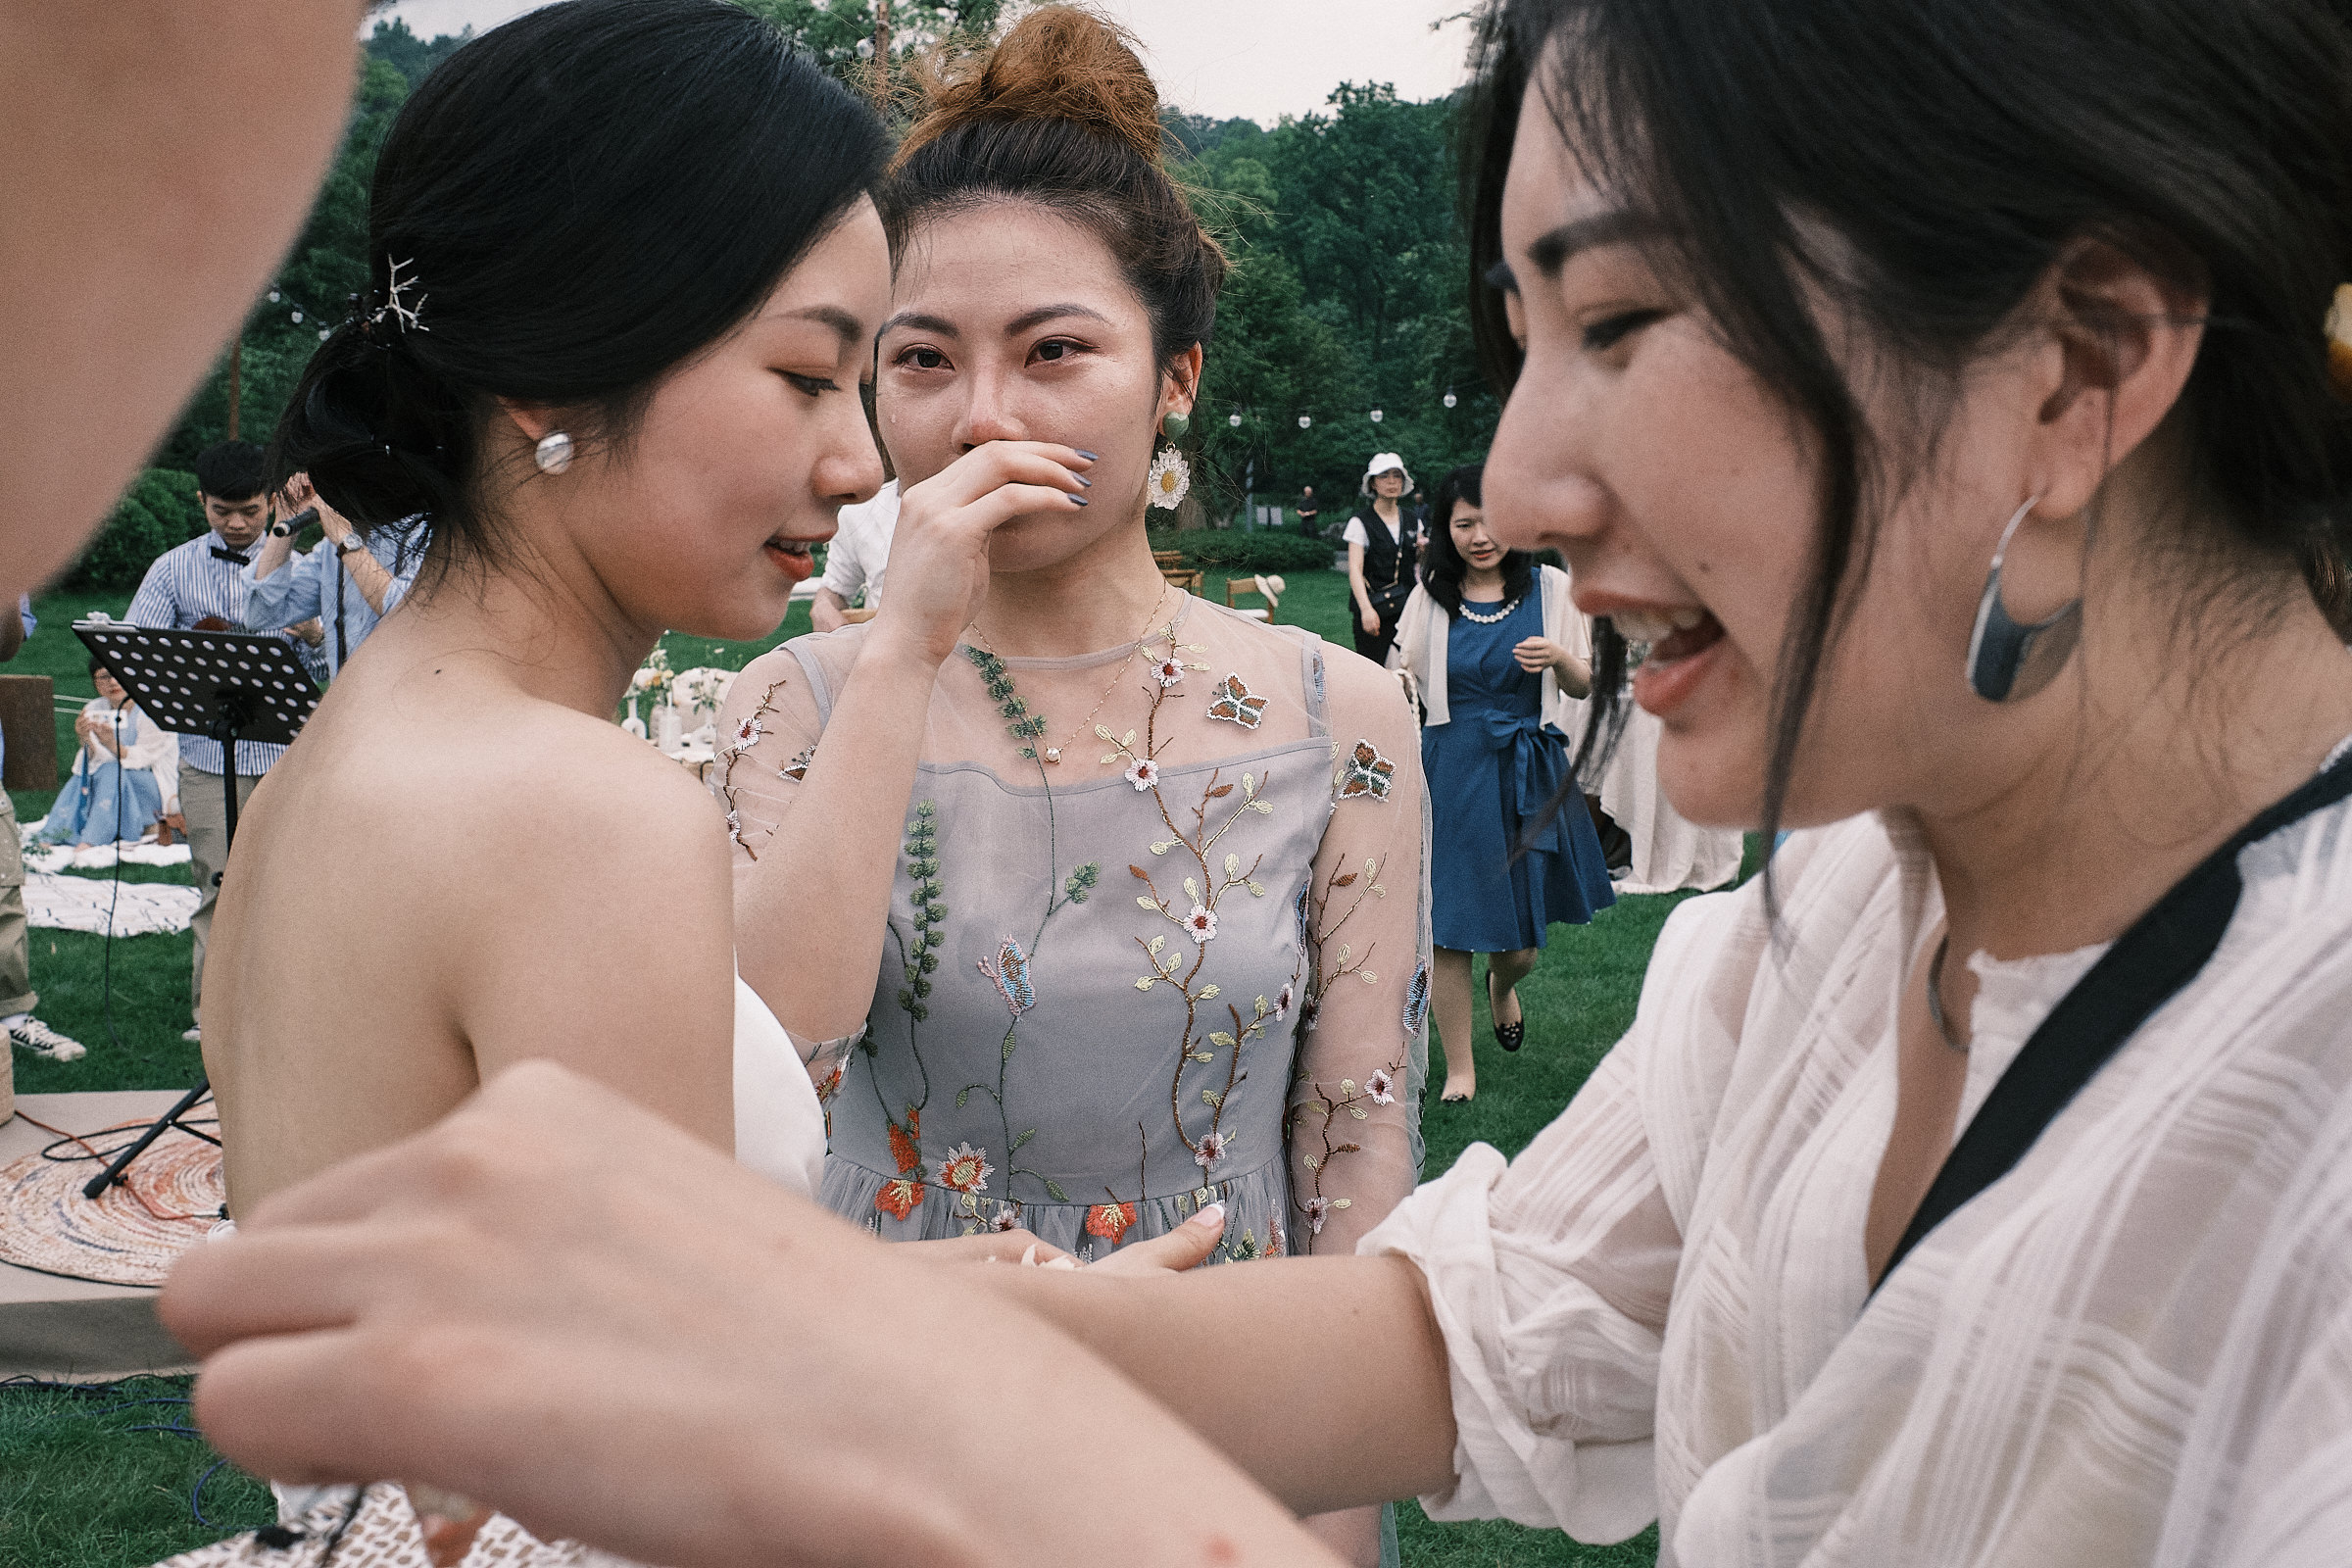 friend of bride looks at her with tears in her eyes